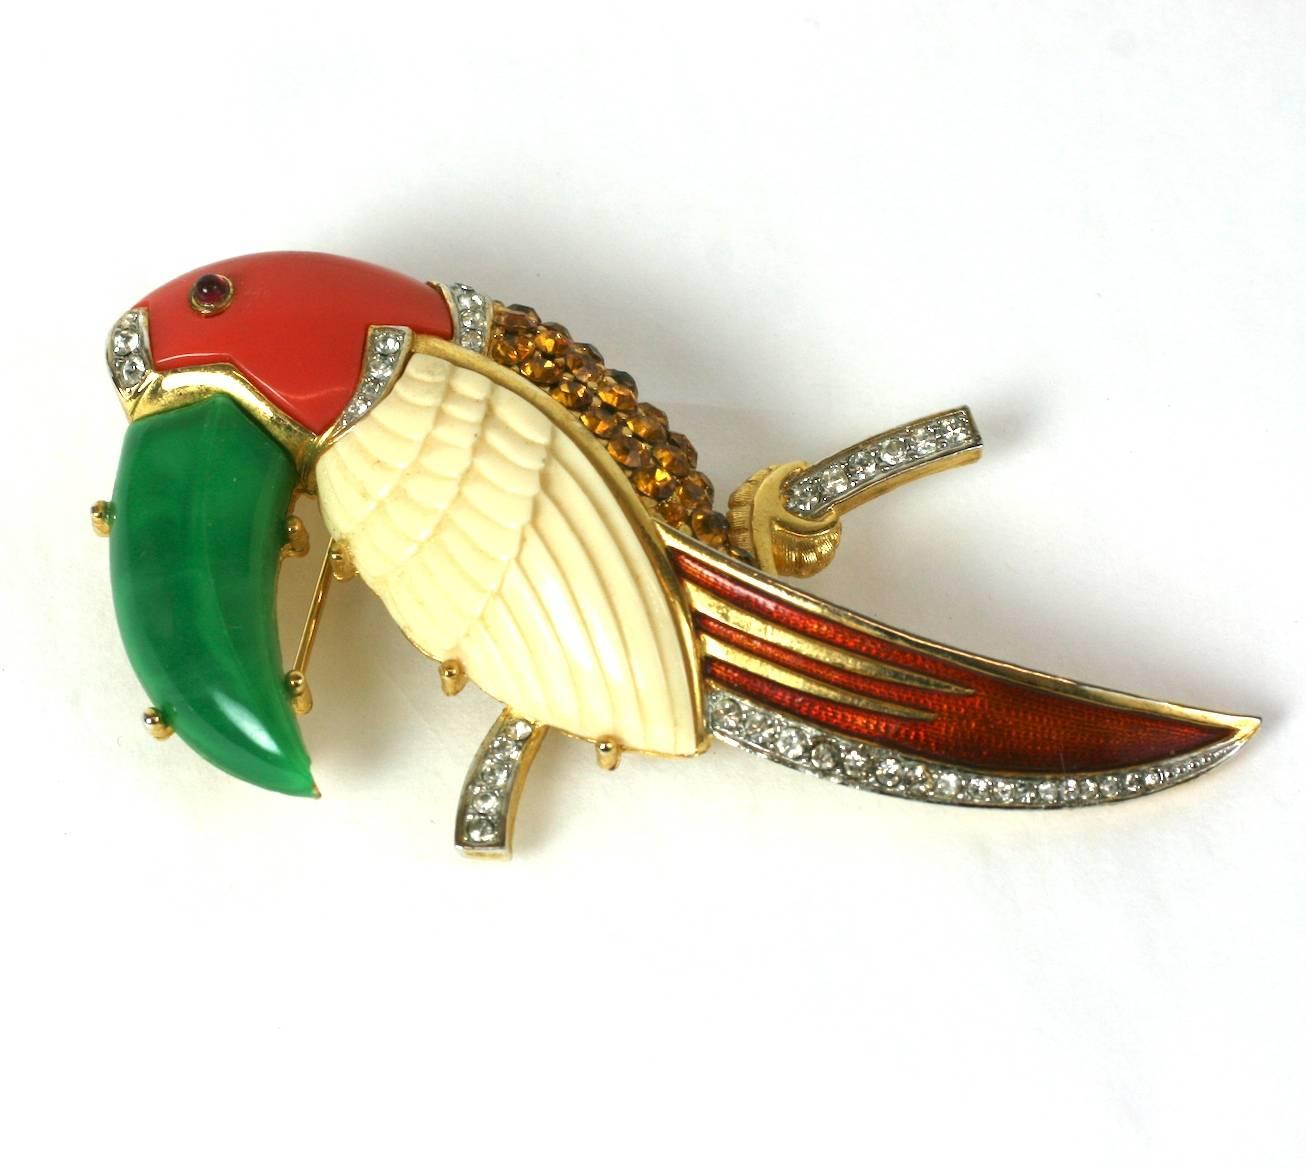 Charming Hattie Carnegie Toucan brooch made with molded resin to replicate coral, ivory and jade carvings. All these are offset with pave rhinestone work in crystal and citrine on the belly. 1960's USA. 3.25